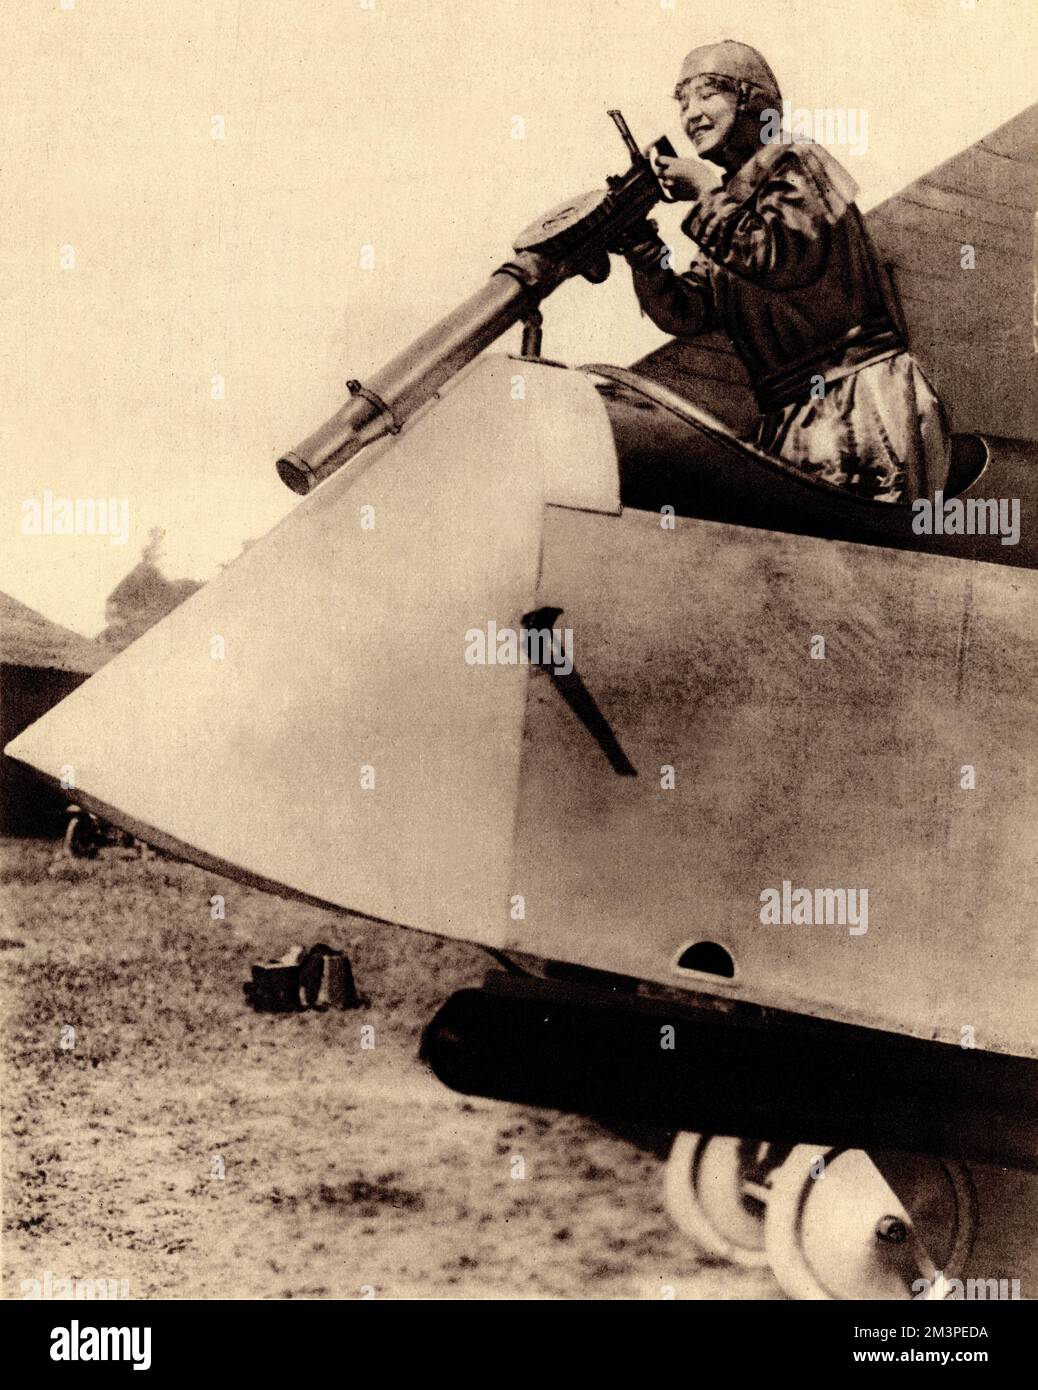 WW1 - An illustration of Mrs A. S. Hitchcock who was part of the Italian Army for expert skill in aeroplane operation. She is seen here giving a demonstration within Italian lines for a number of Americans. She manipulates the gun as if in action with an enemy plane below, showing how to handle the Lewis automatic machine-gun in an armed aircraft.     Date: 1916 Stock Photo